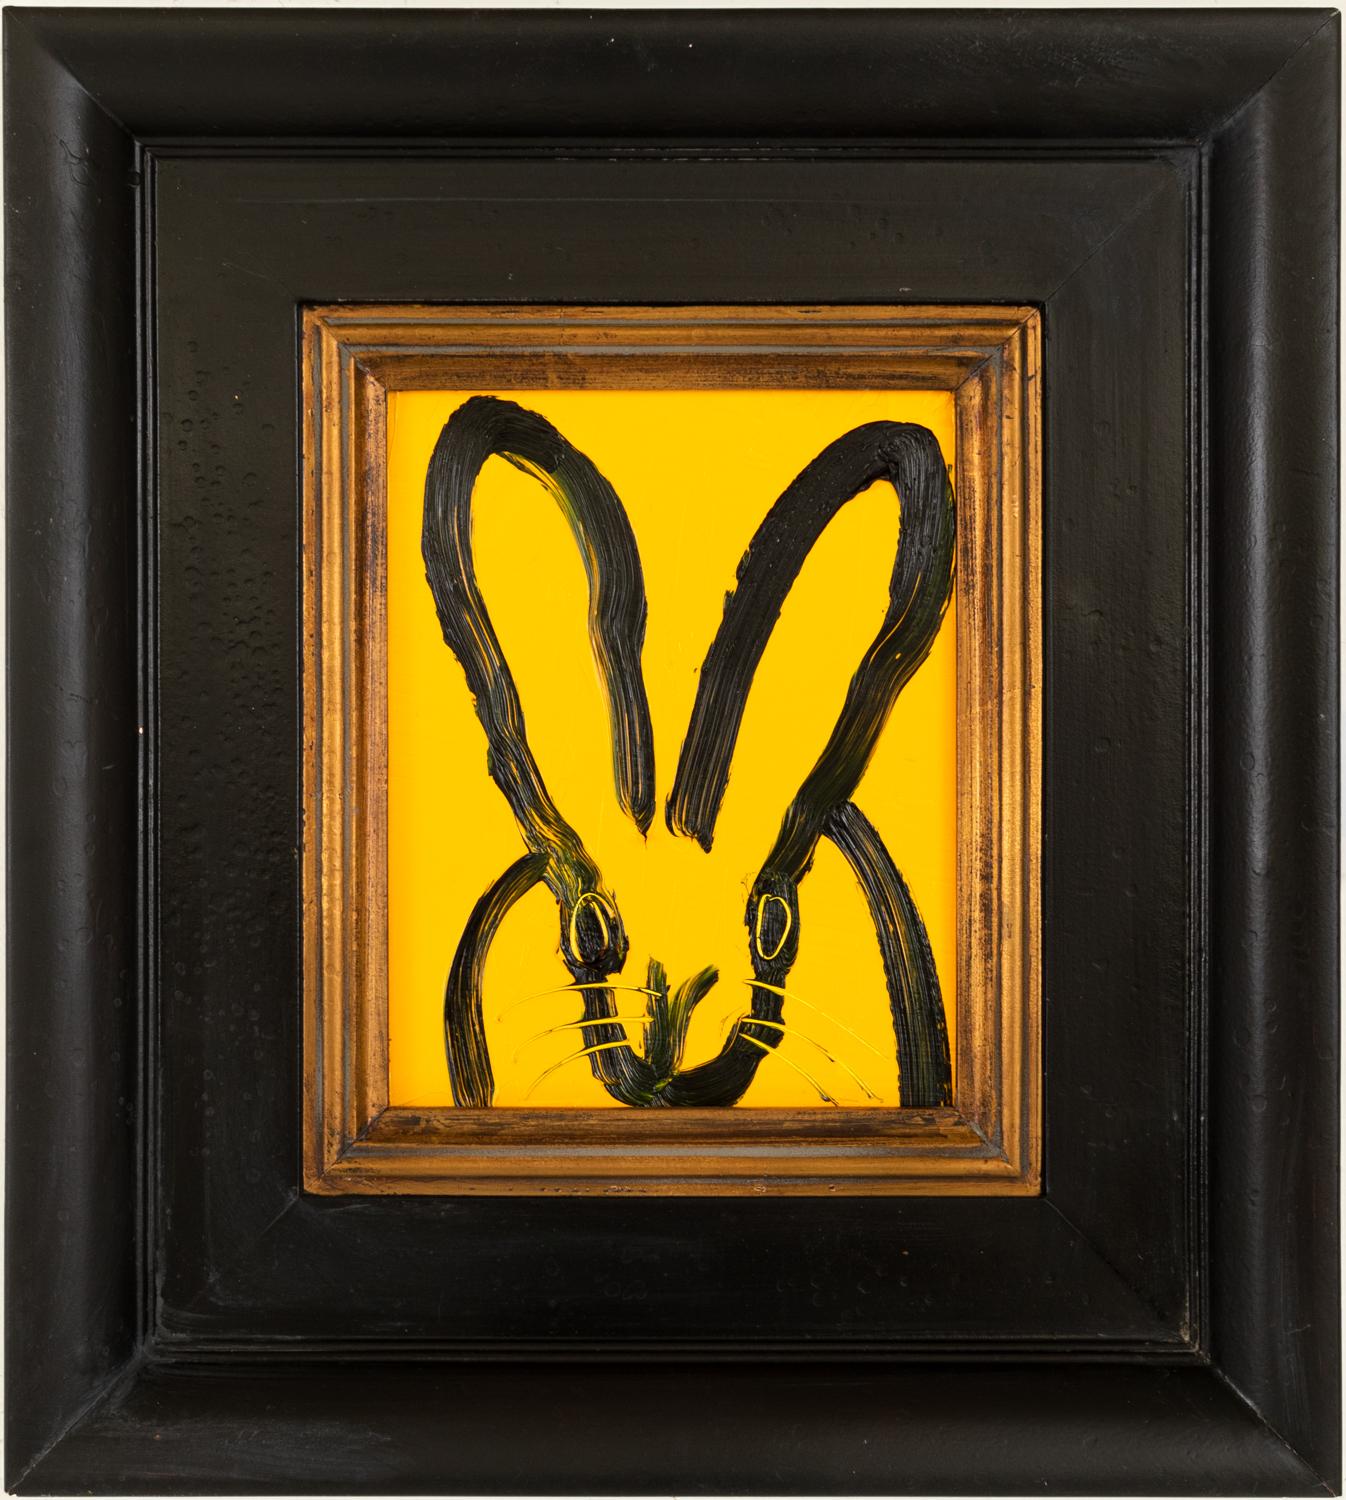 Hunt Slonem Animal Painting - Naval "Bunny Painting" Original Oil Painting in Vintage Black and Gold Frame